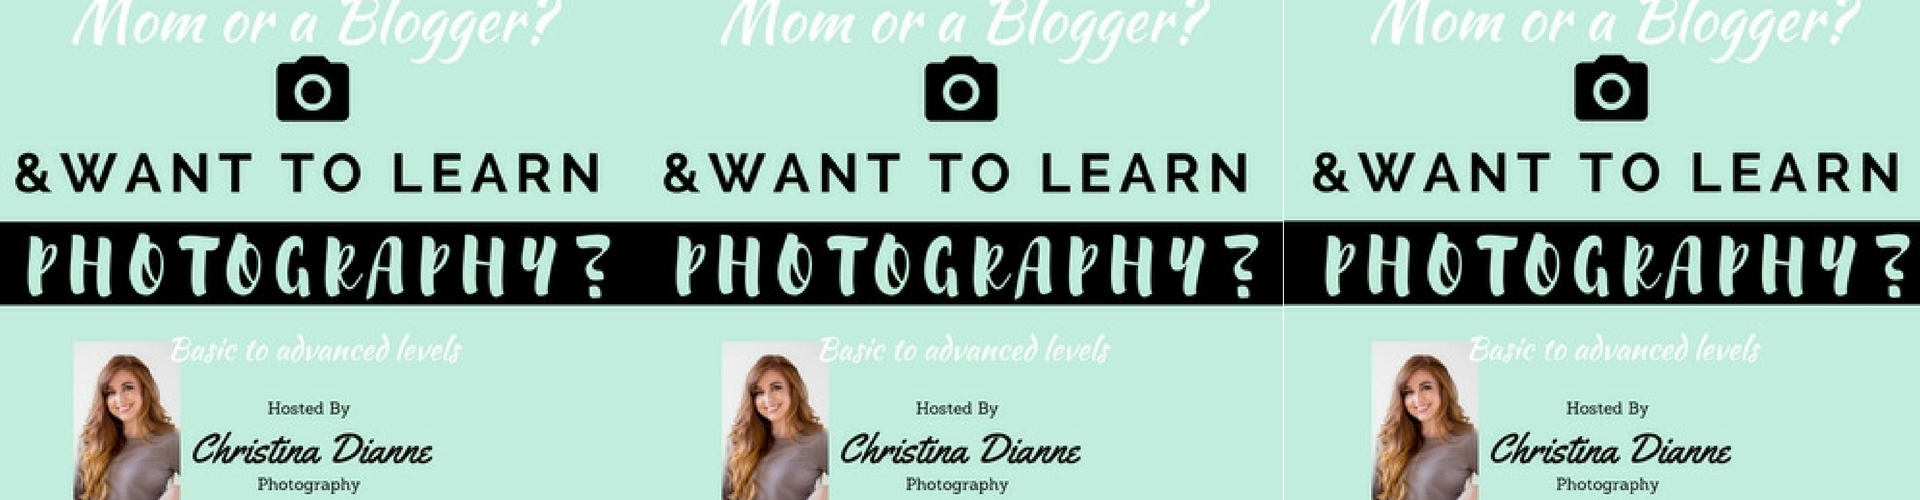 Calling all moms, bloggers, and mom bloggers: Learn photography!